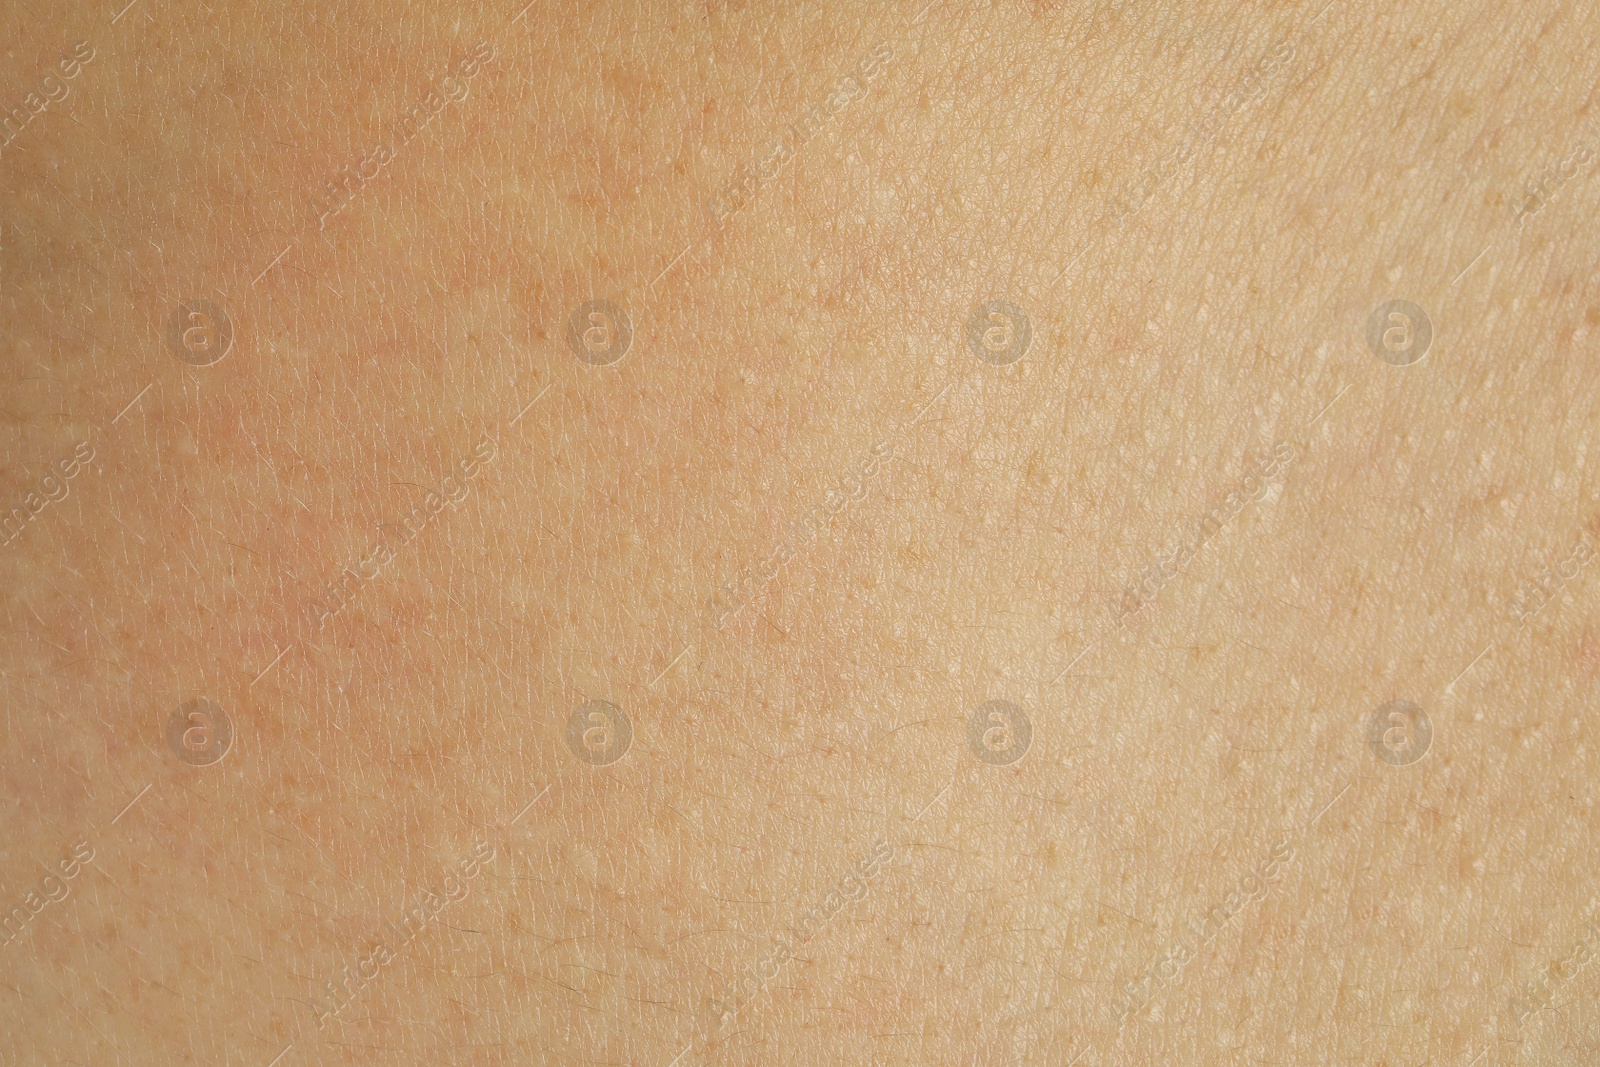 Photo of Texture of human skin with birthmarks, closeup view